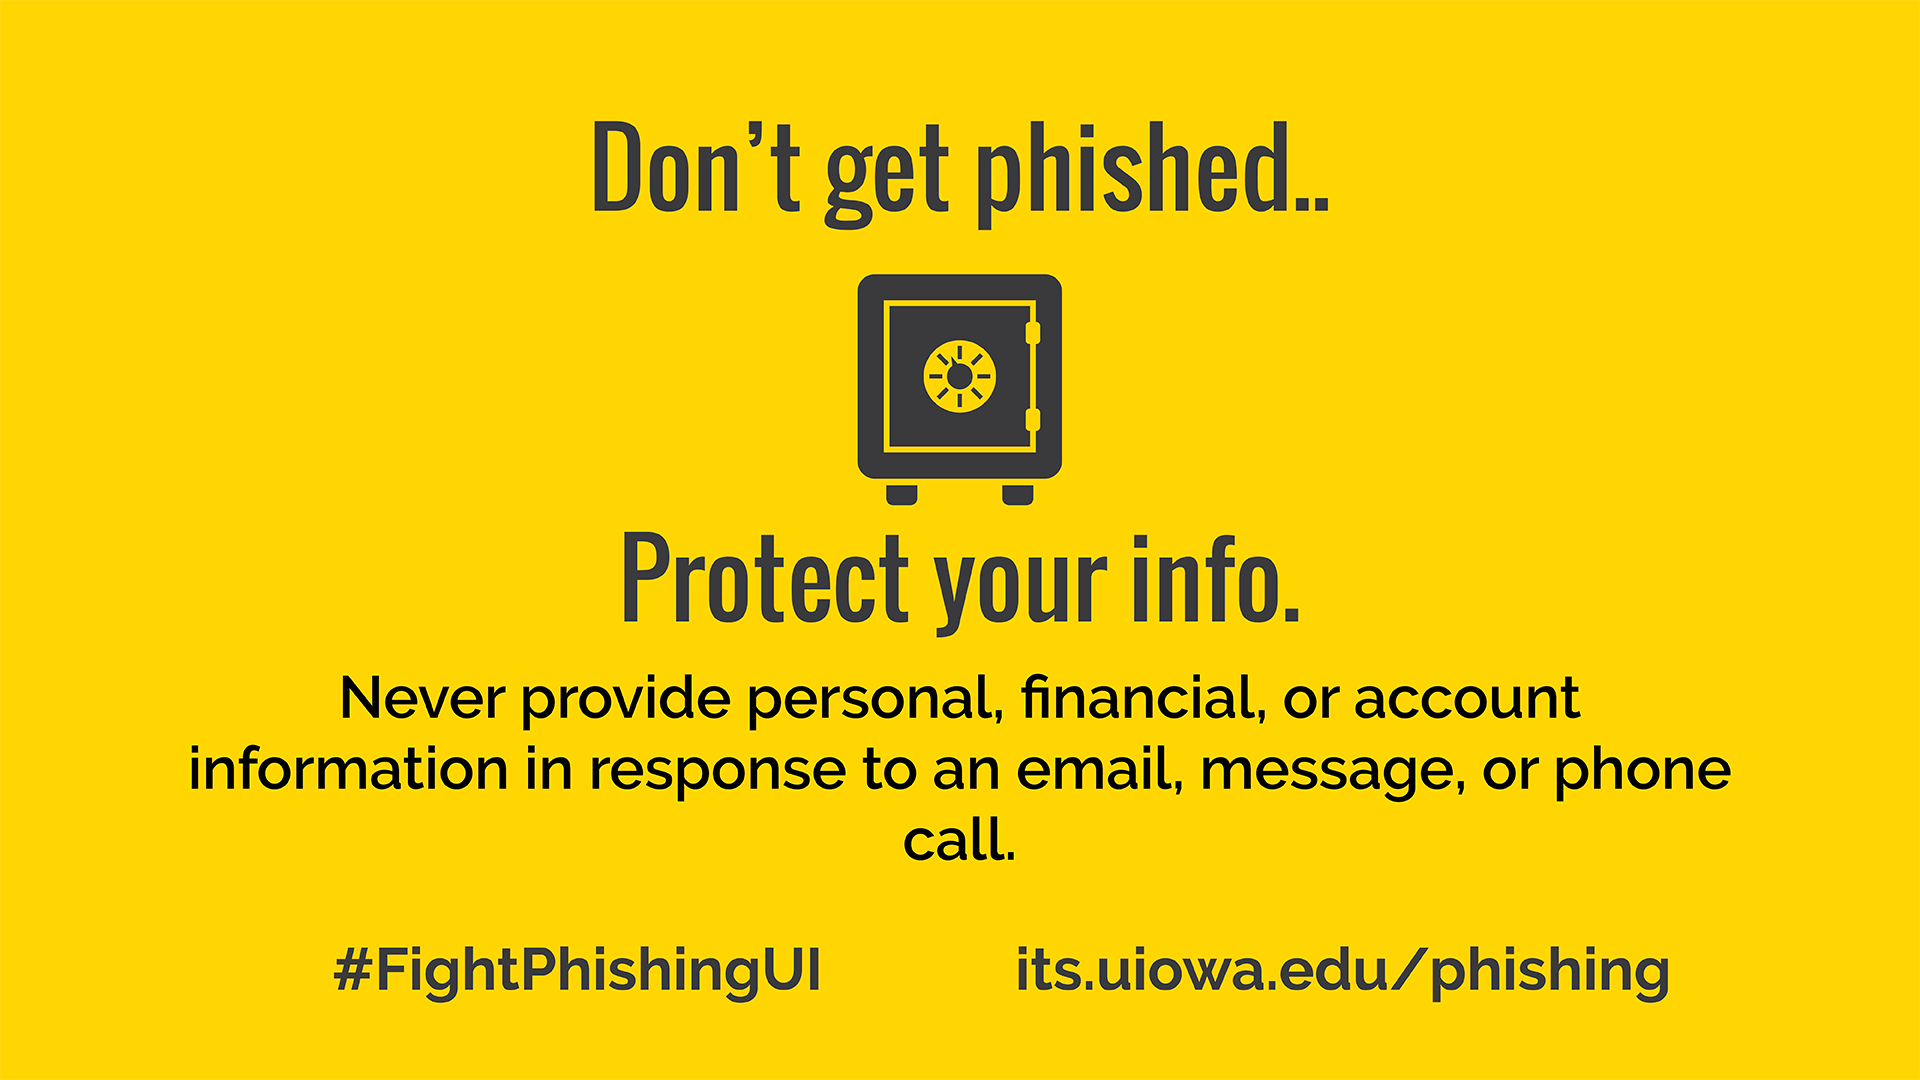 Don't get phished.. protect your info. Never provide personal, financial, or account information in response to an email, message or phone call. #FightPhishingUI its.uiowa.edu/phishing